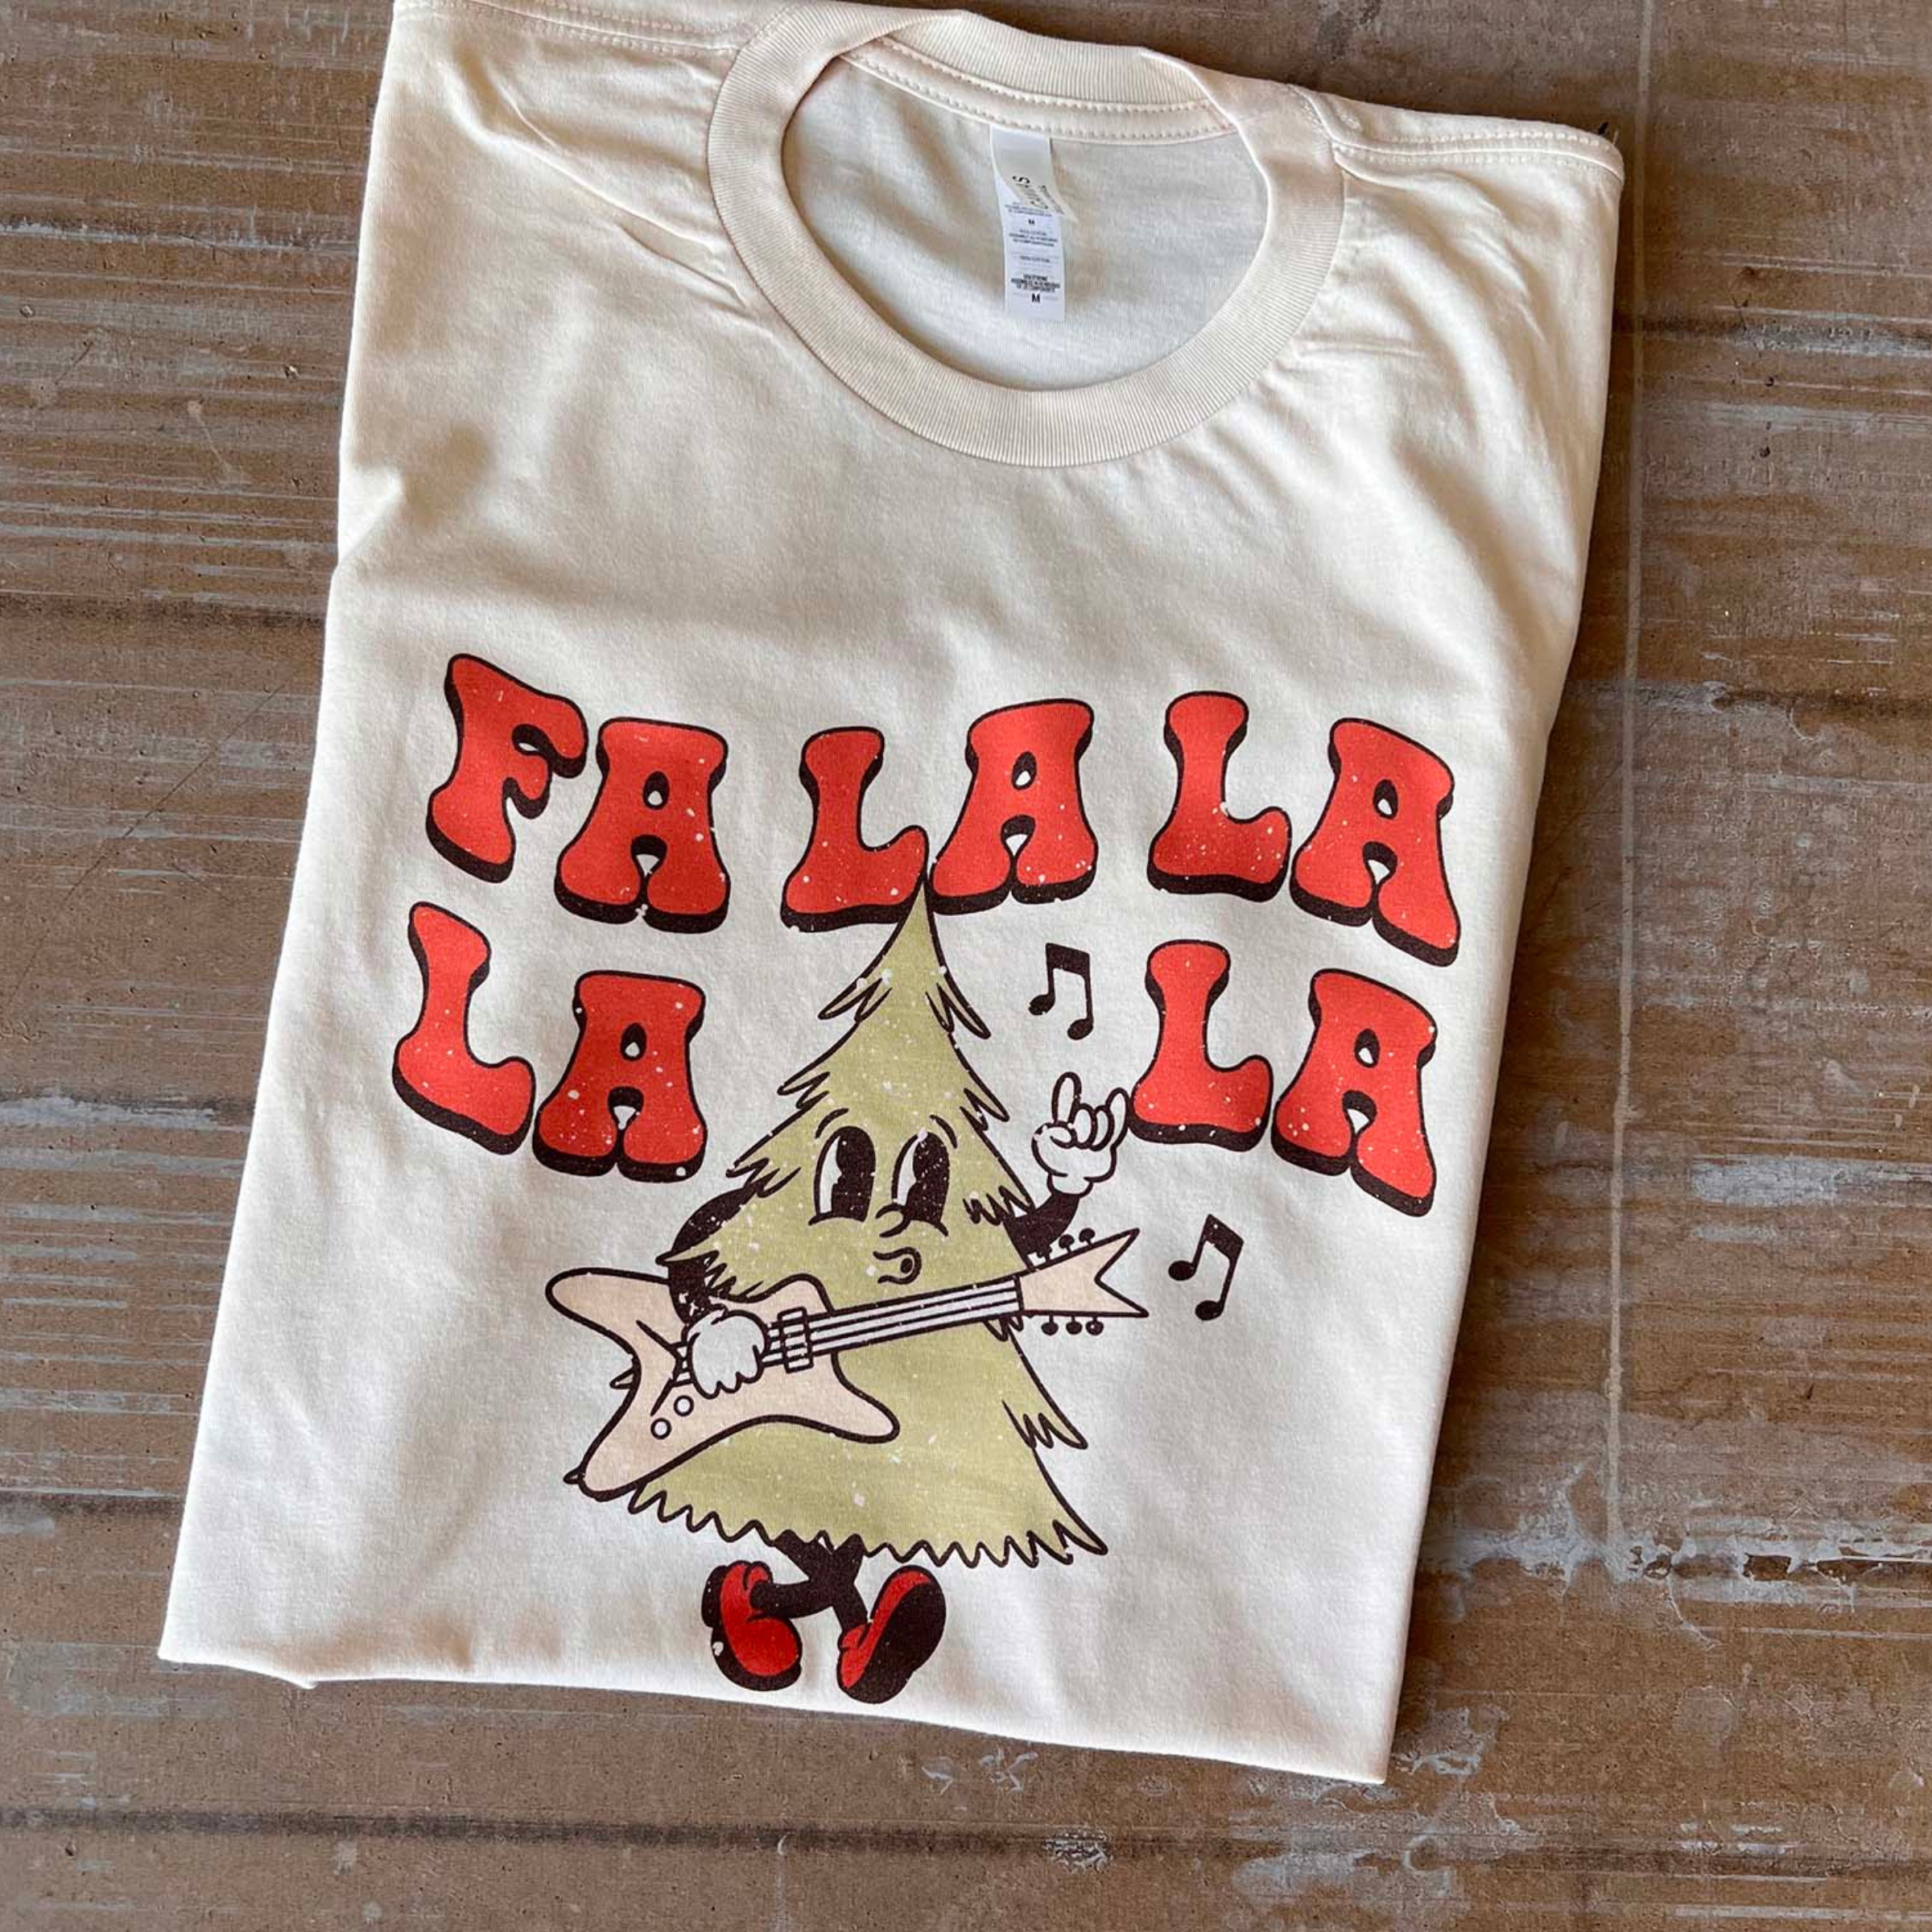 This cream tee includes a crew neckline, short sleeves, and a graphic that says "Fa La La La La" in a cute font with a Christmas Tree playing a guitar and throwing up a rock on hand symbol. This tee is shown here as a folded flat lay. 